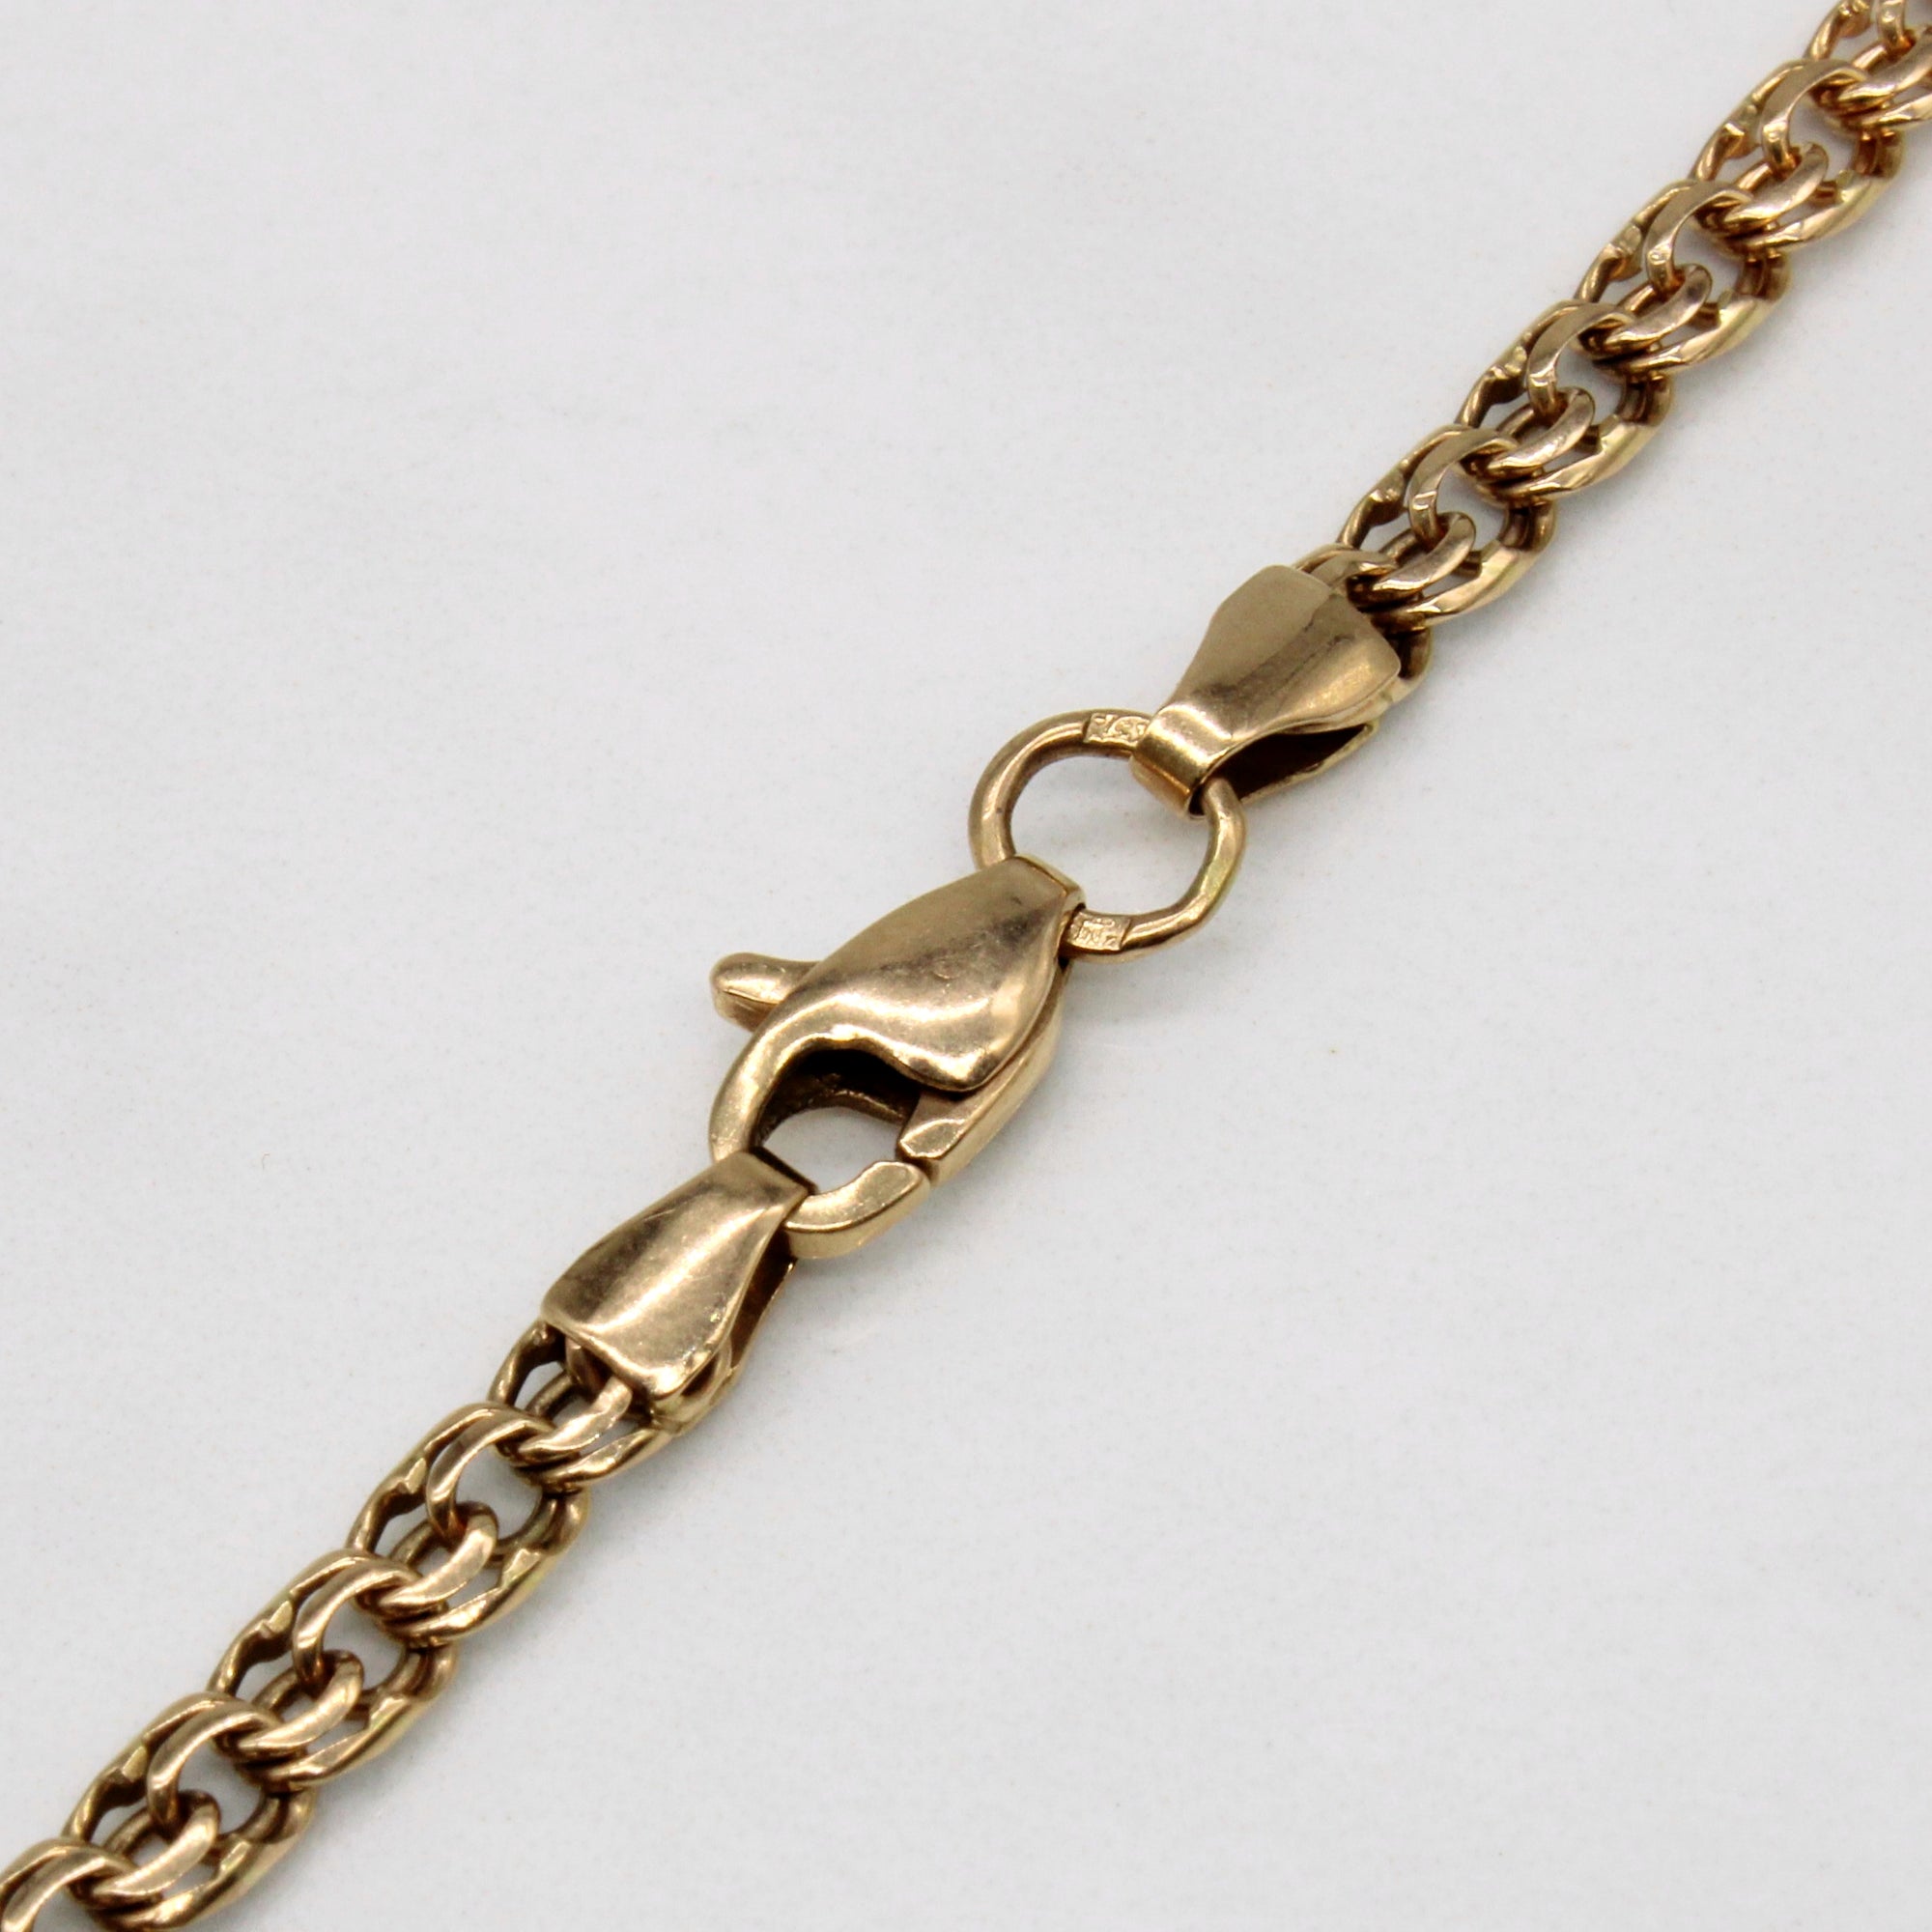 14k Yellow Gold Necklace | 22